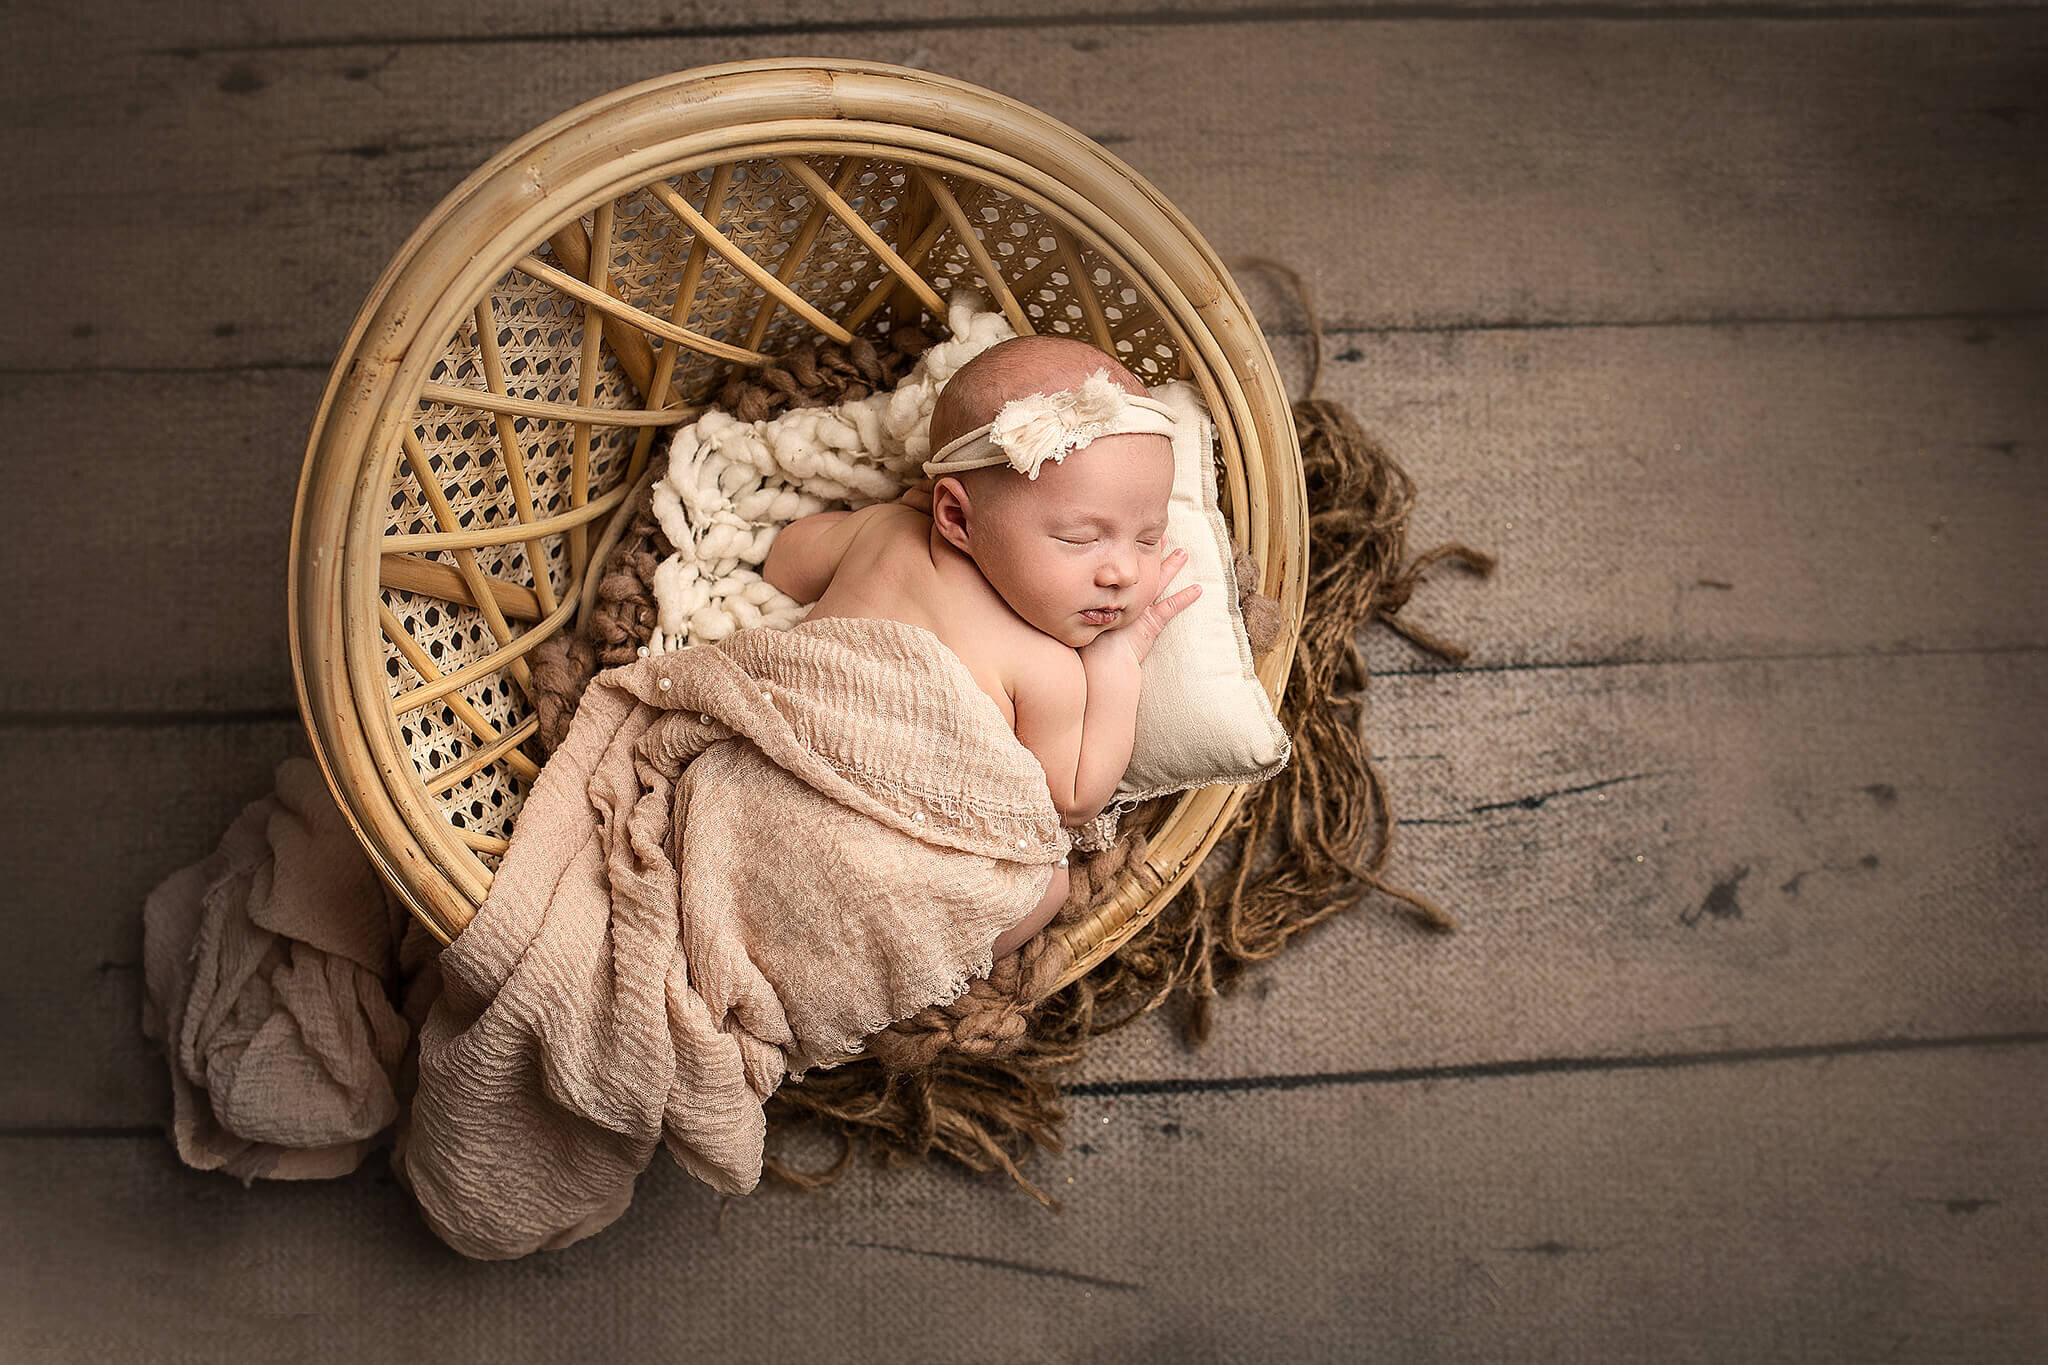 newborn baby girl sweetly laying in a round whicker chair while she is wrapped in a brown wrap, and laying her head on a little pillow